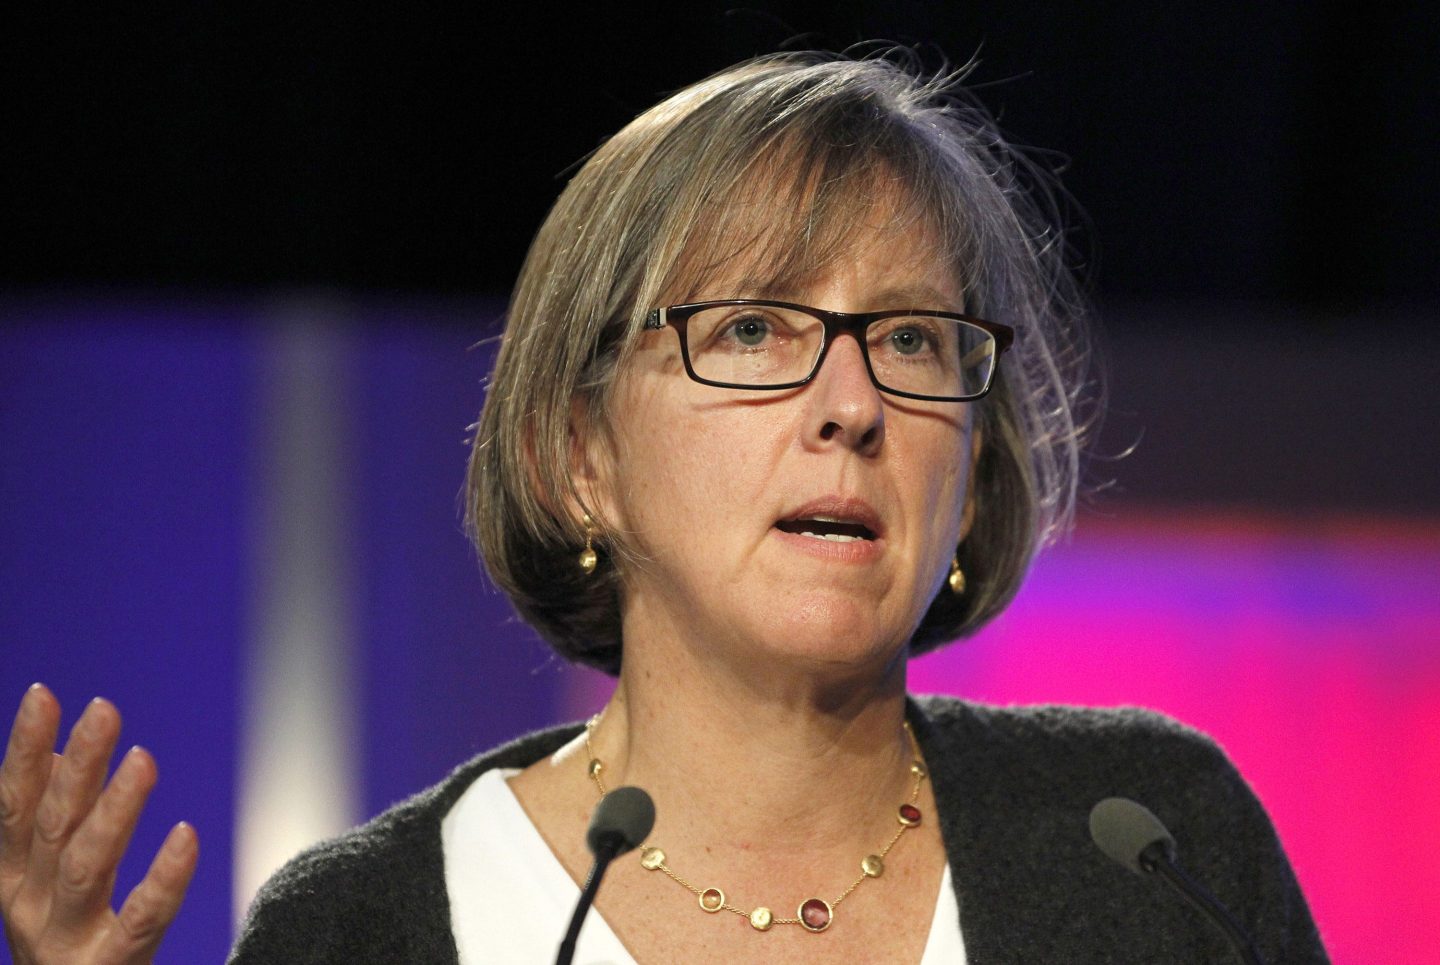 Mary Meeker, analyst with Morgan Stanley, speaks during the Web 2.0 Summit in San Francisco, California, U.S., on Tuesday, Nov. 16, 2010. This year&#039;s conference, which runs through Nov. 17, is titled &quot;Points of Control: The Battle for the Network Economy.&quot; Photographer: Tony Avelar/Bloomberg via Getty Images